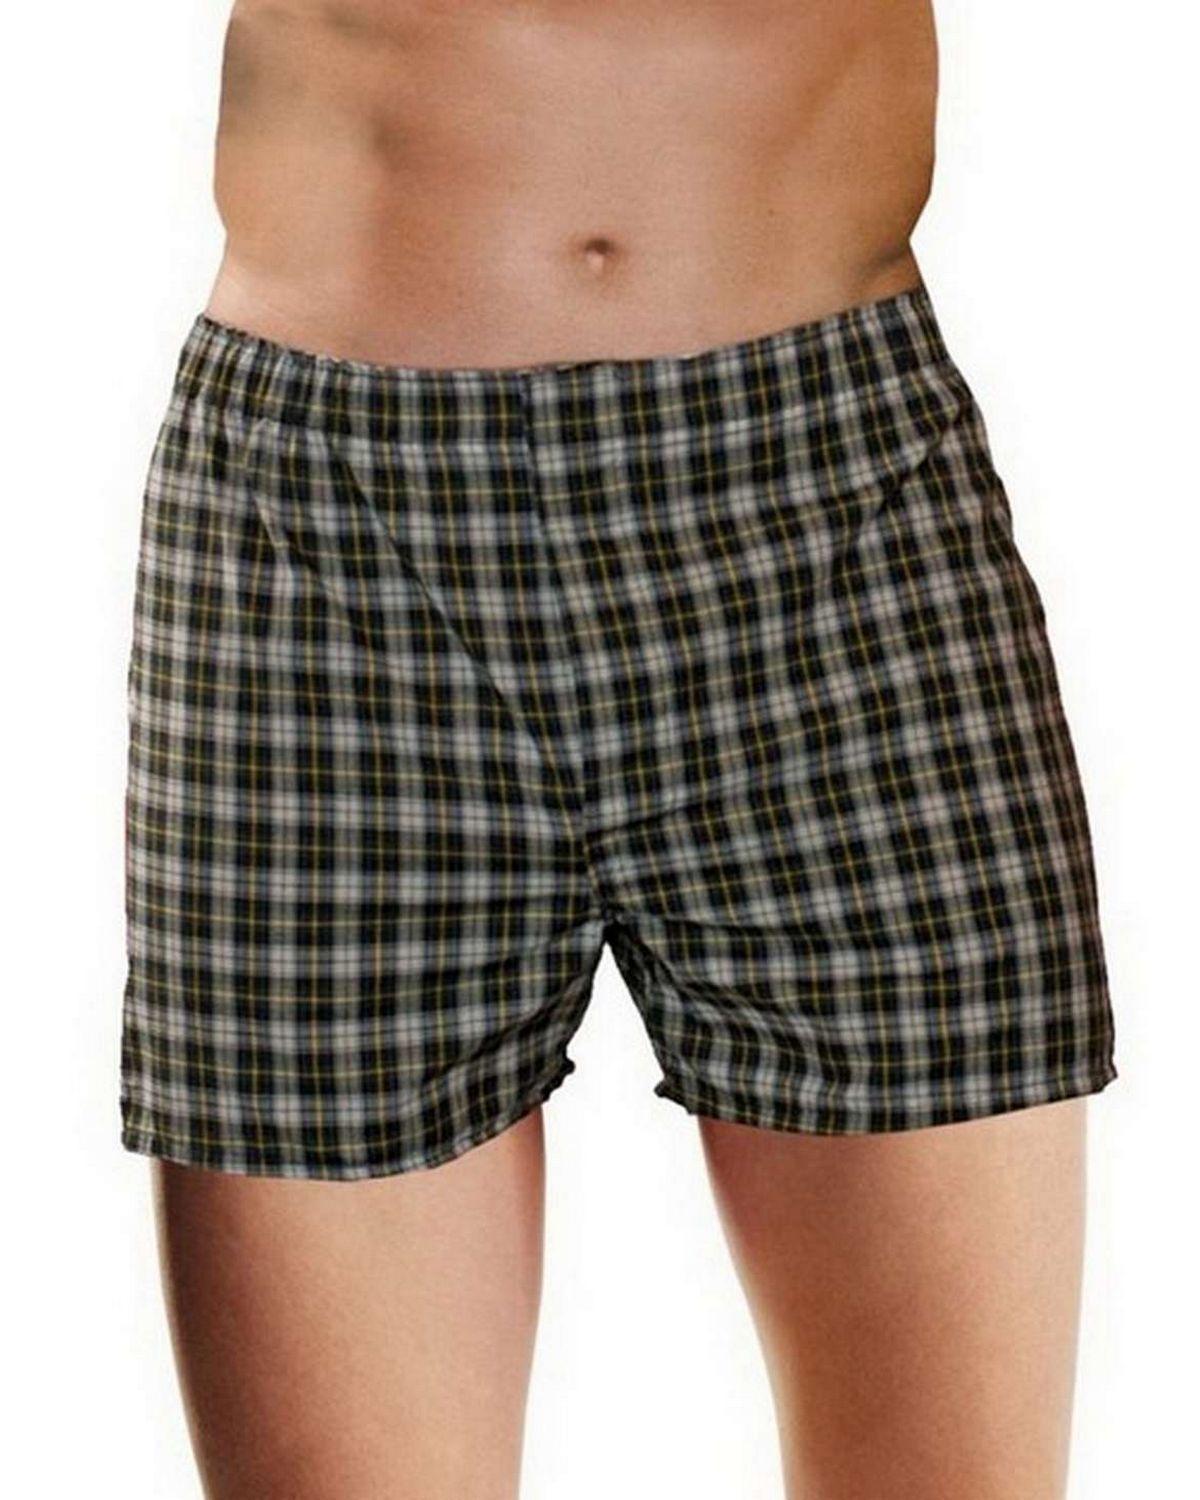 Hanes HN155W Mens TAGLESS Woven Boxers 3X-5X (Pack of 3)